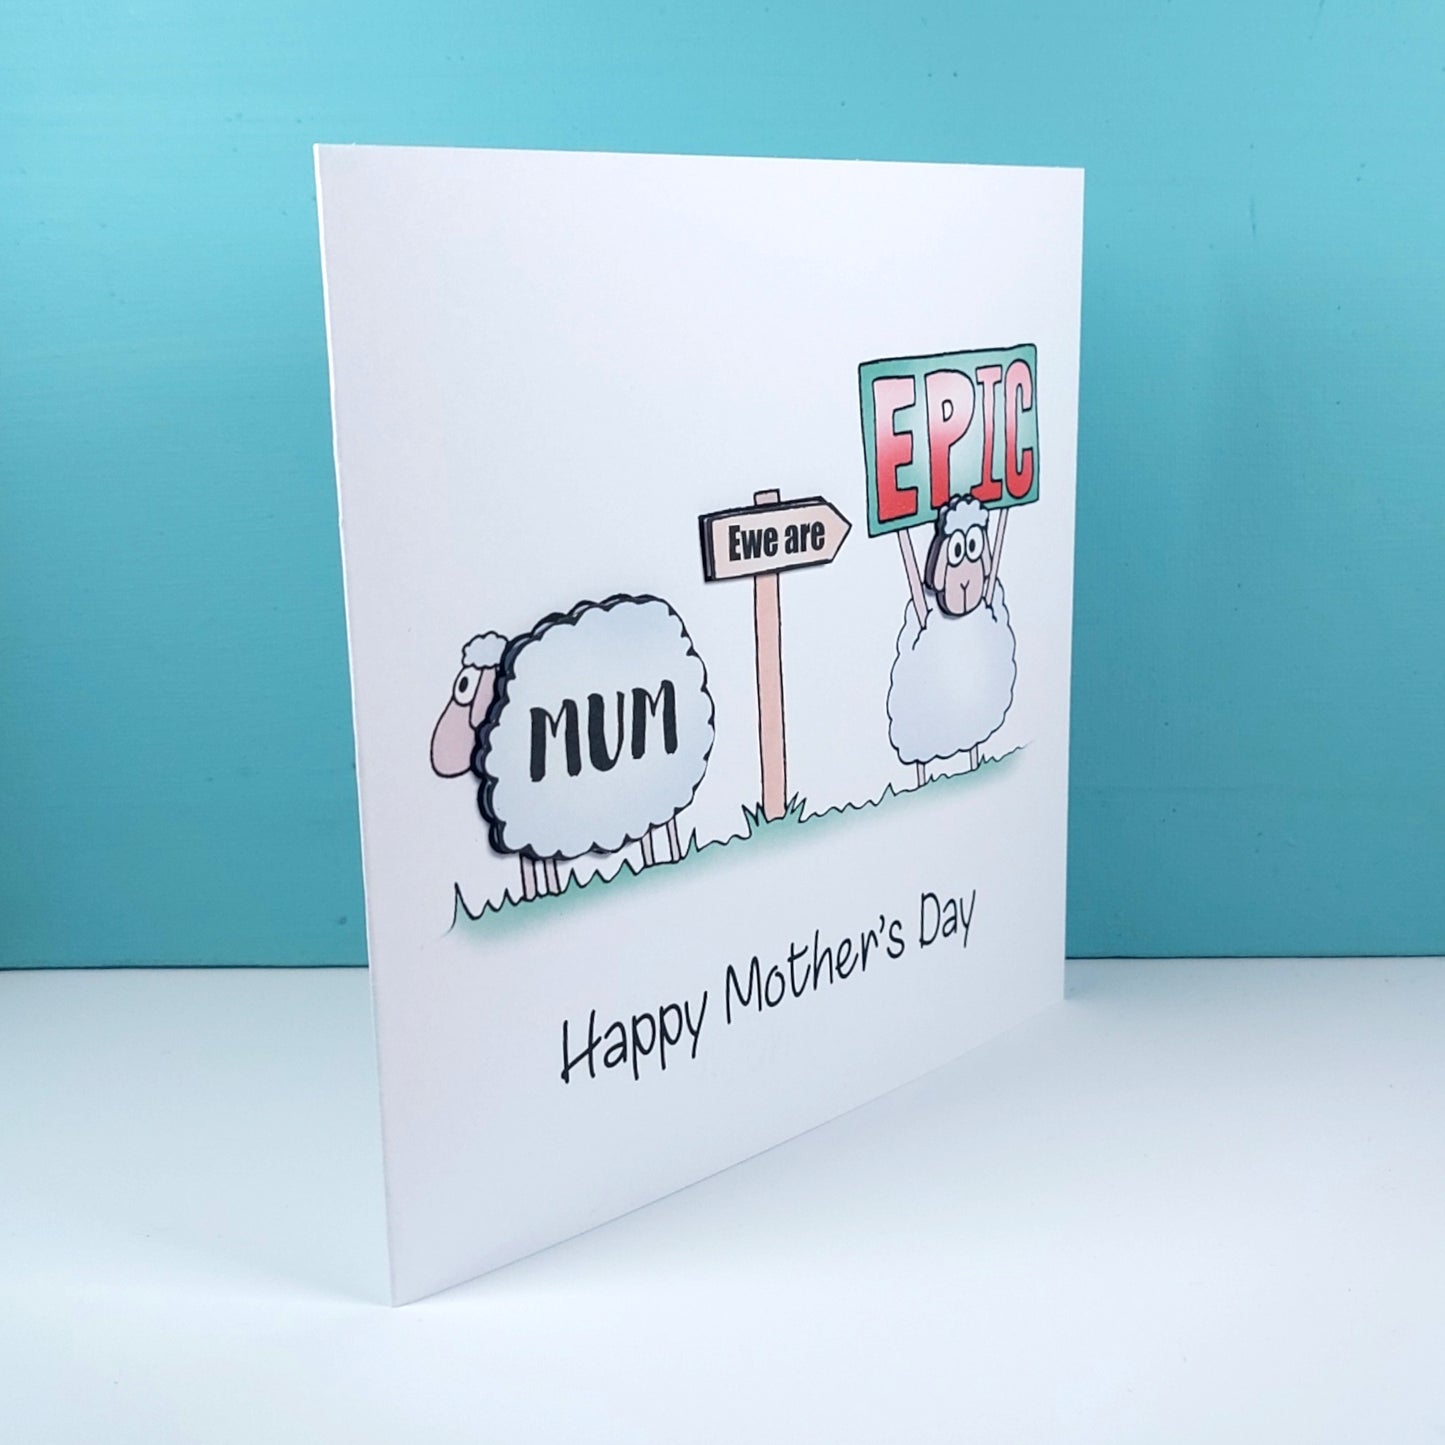 Mum ewe are epic sheep Mothers day card